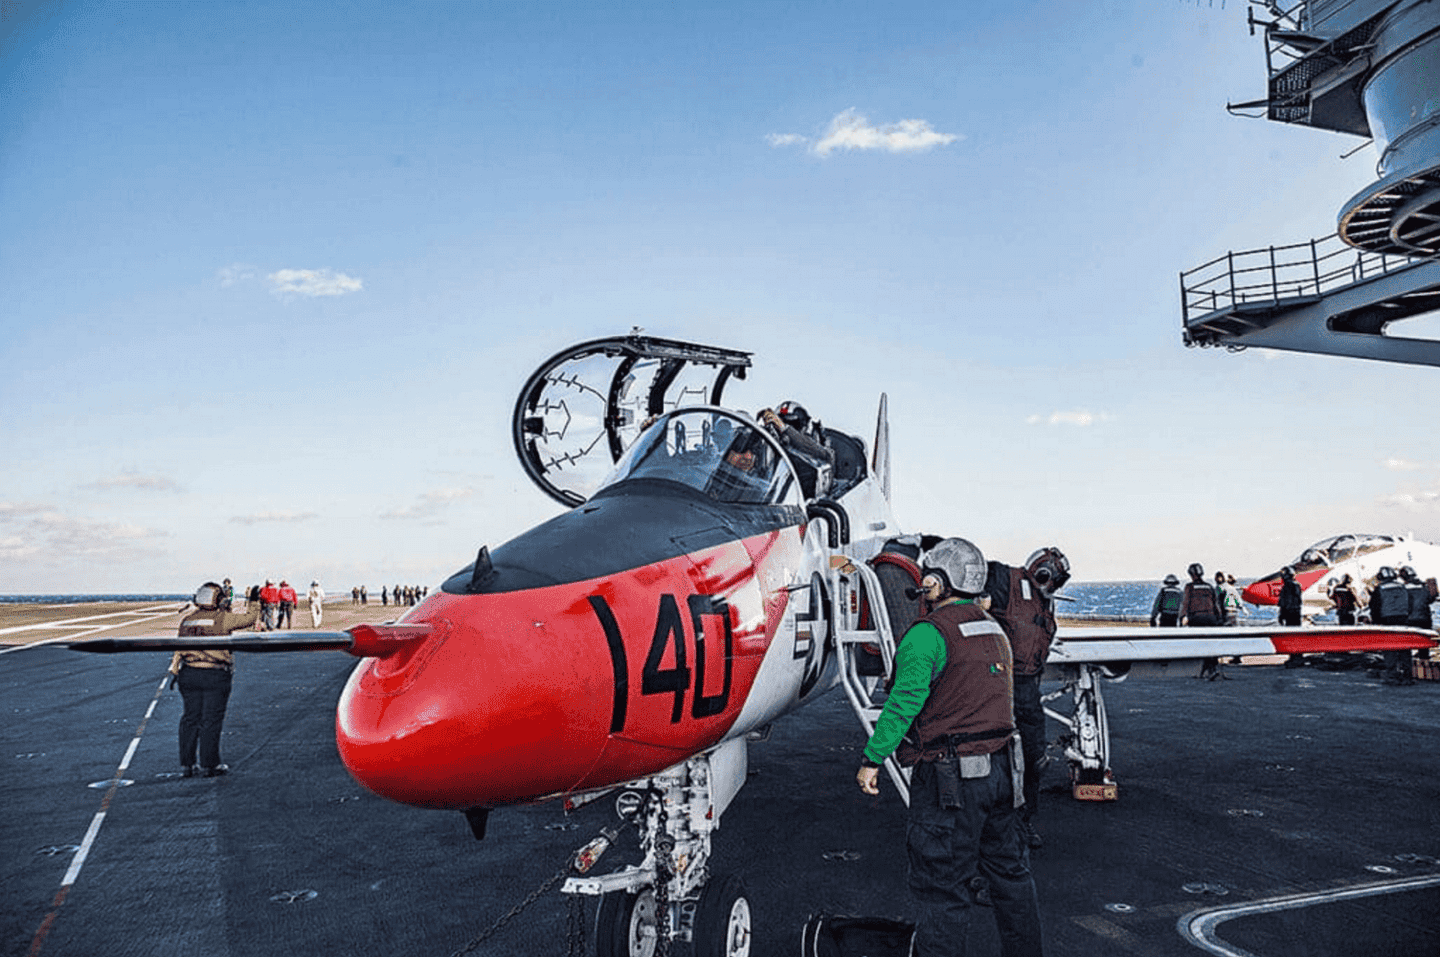 Student pilots prepare to exit a T-45C Goshawk assigned to Carrier Training Wing (CTW) 2 on the flight deck of the aircraft carrier USS Dwight D. Eisenhower (CVN 69). (U.S. Navy photo by Mass Communication Specialist Seaman Zach Sleeper)